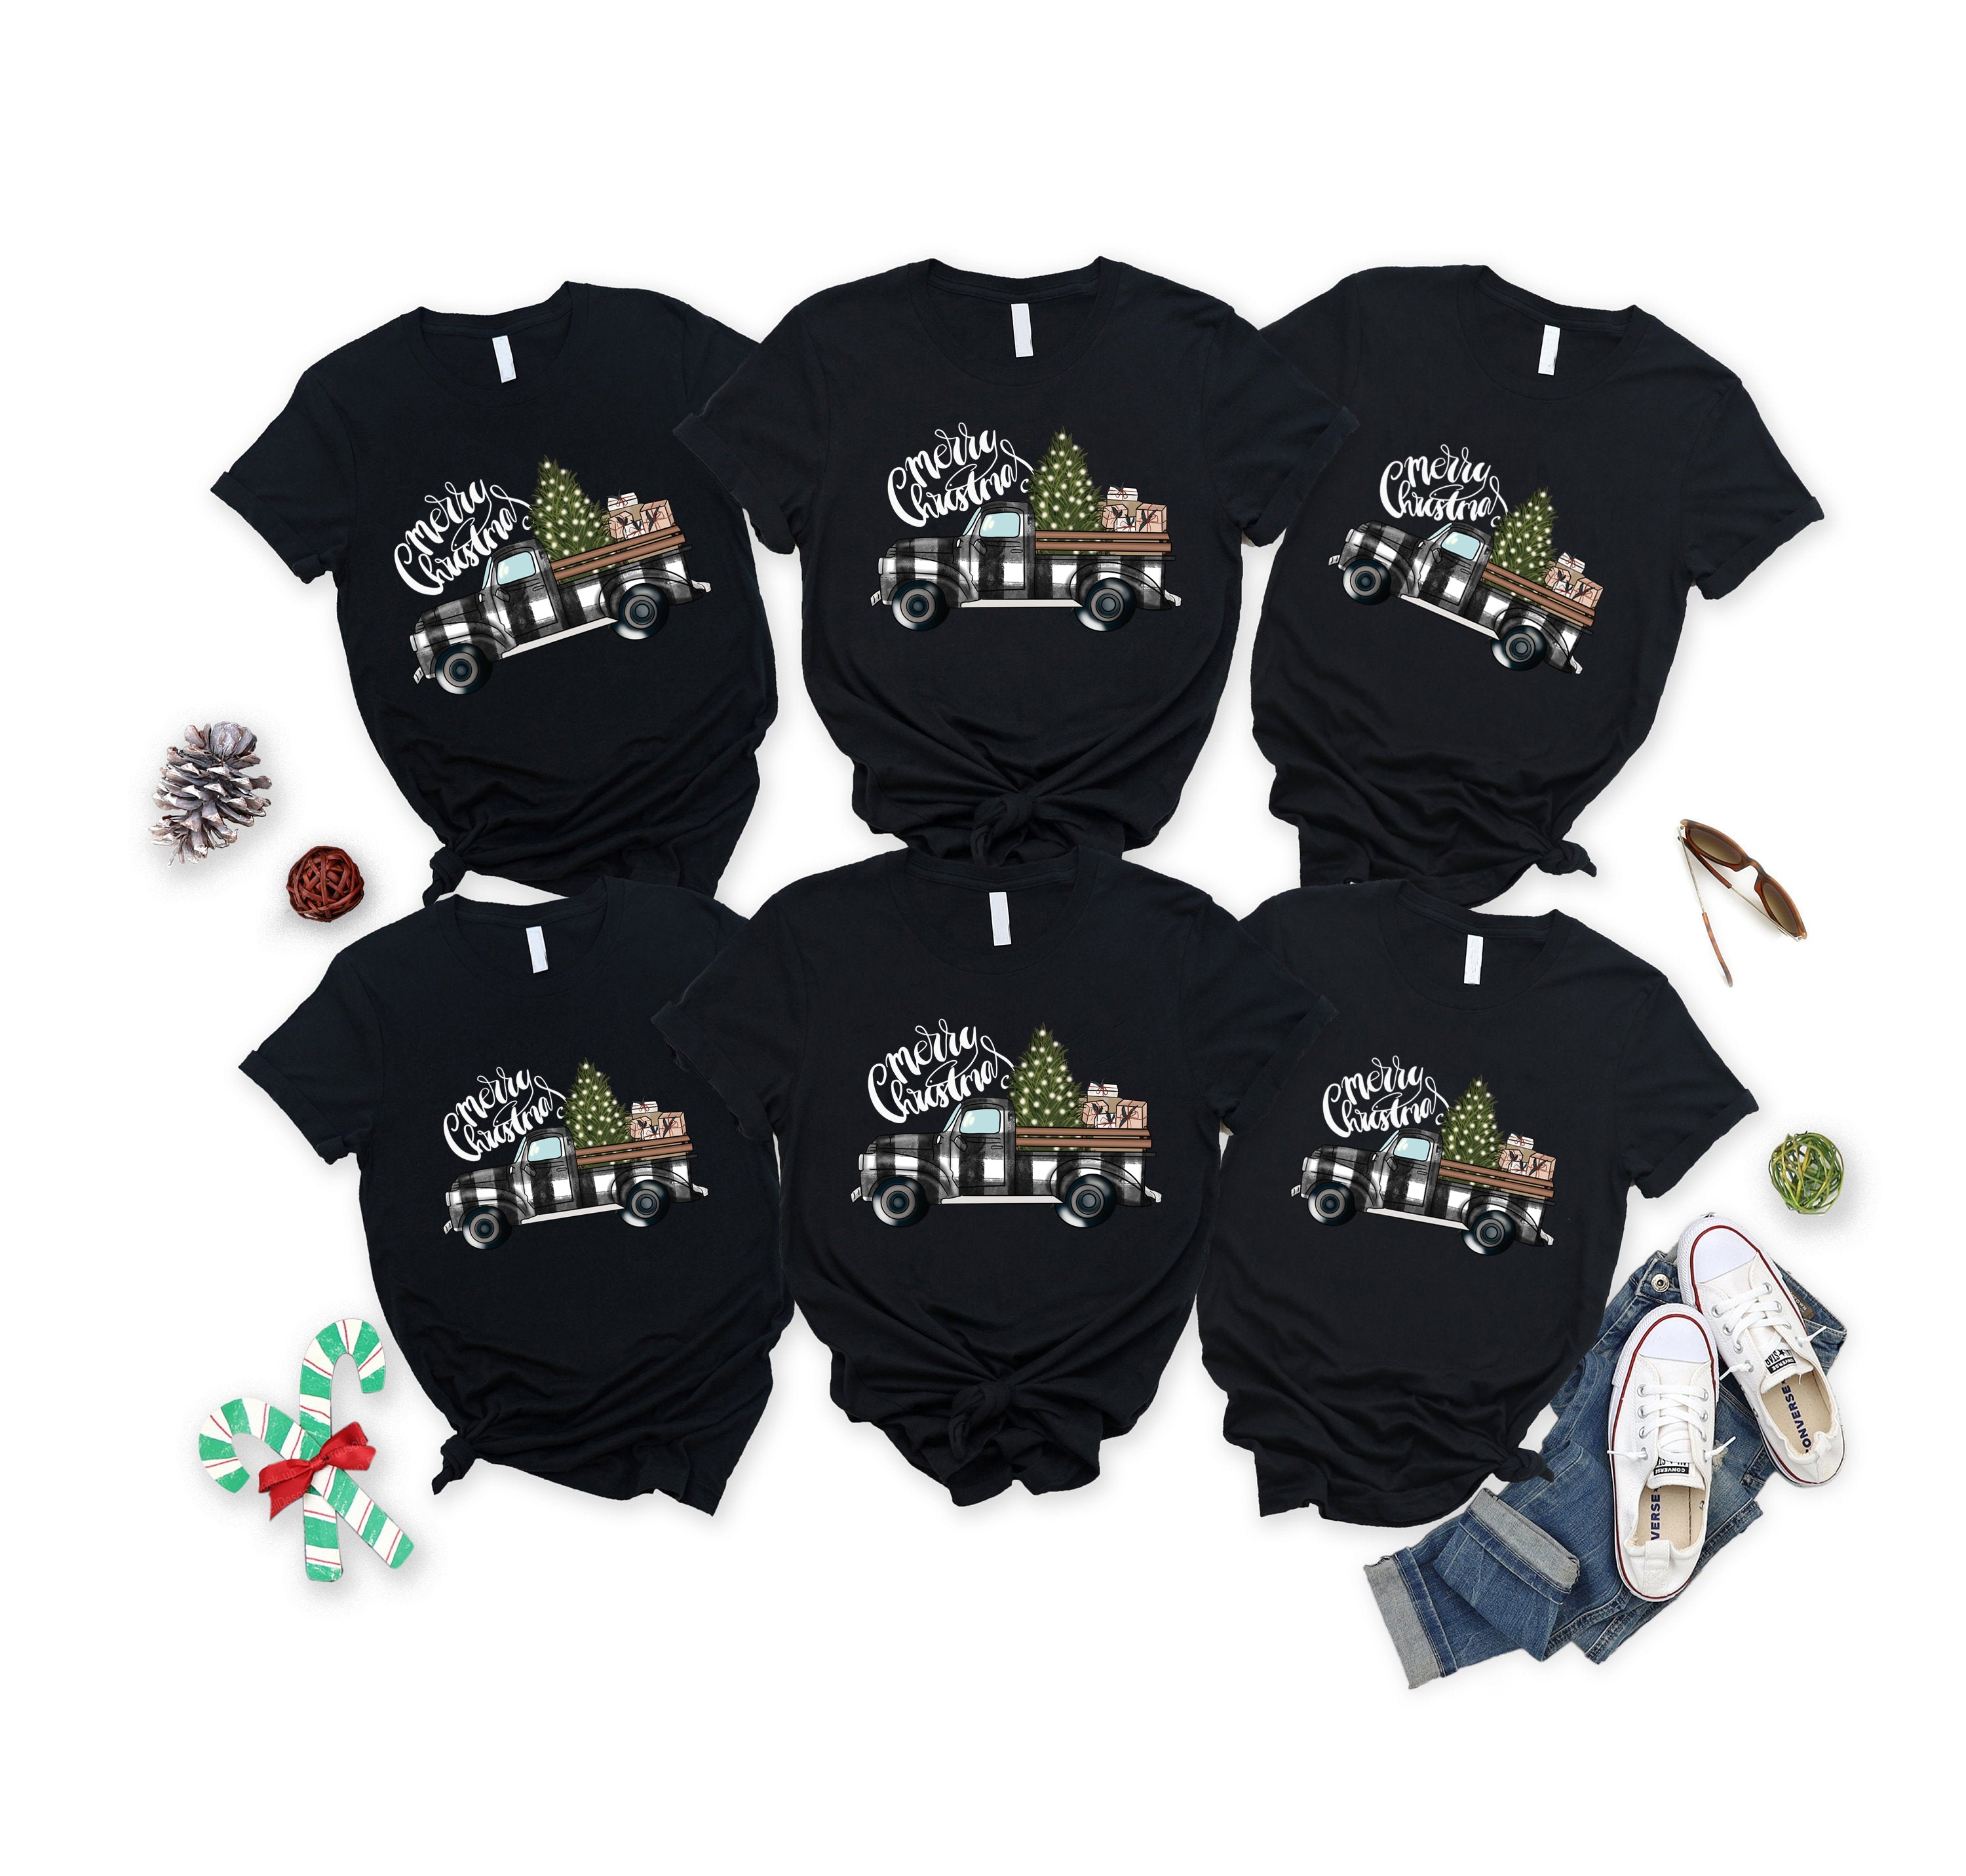 'Merry Chirstmas' Letter and ' A Car Of Gift' Pattern Family Christmas Matching Pajamas Tops Cute Black Short Sleeve T-shirts With Dog Bandana